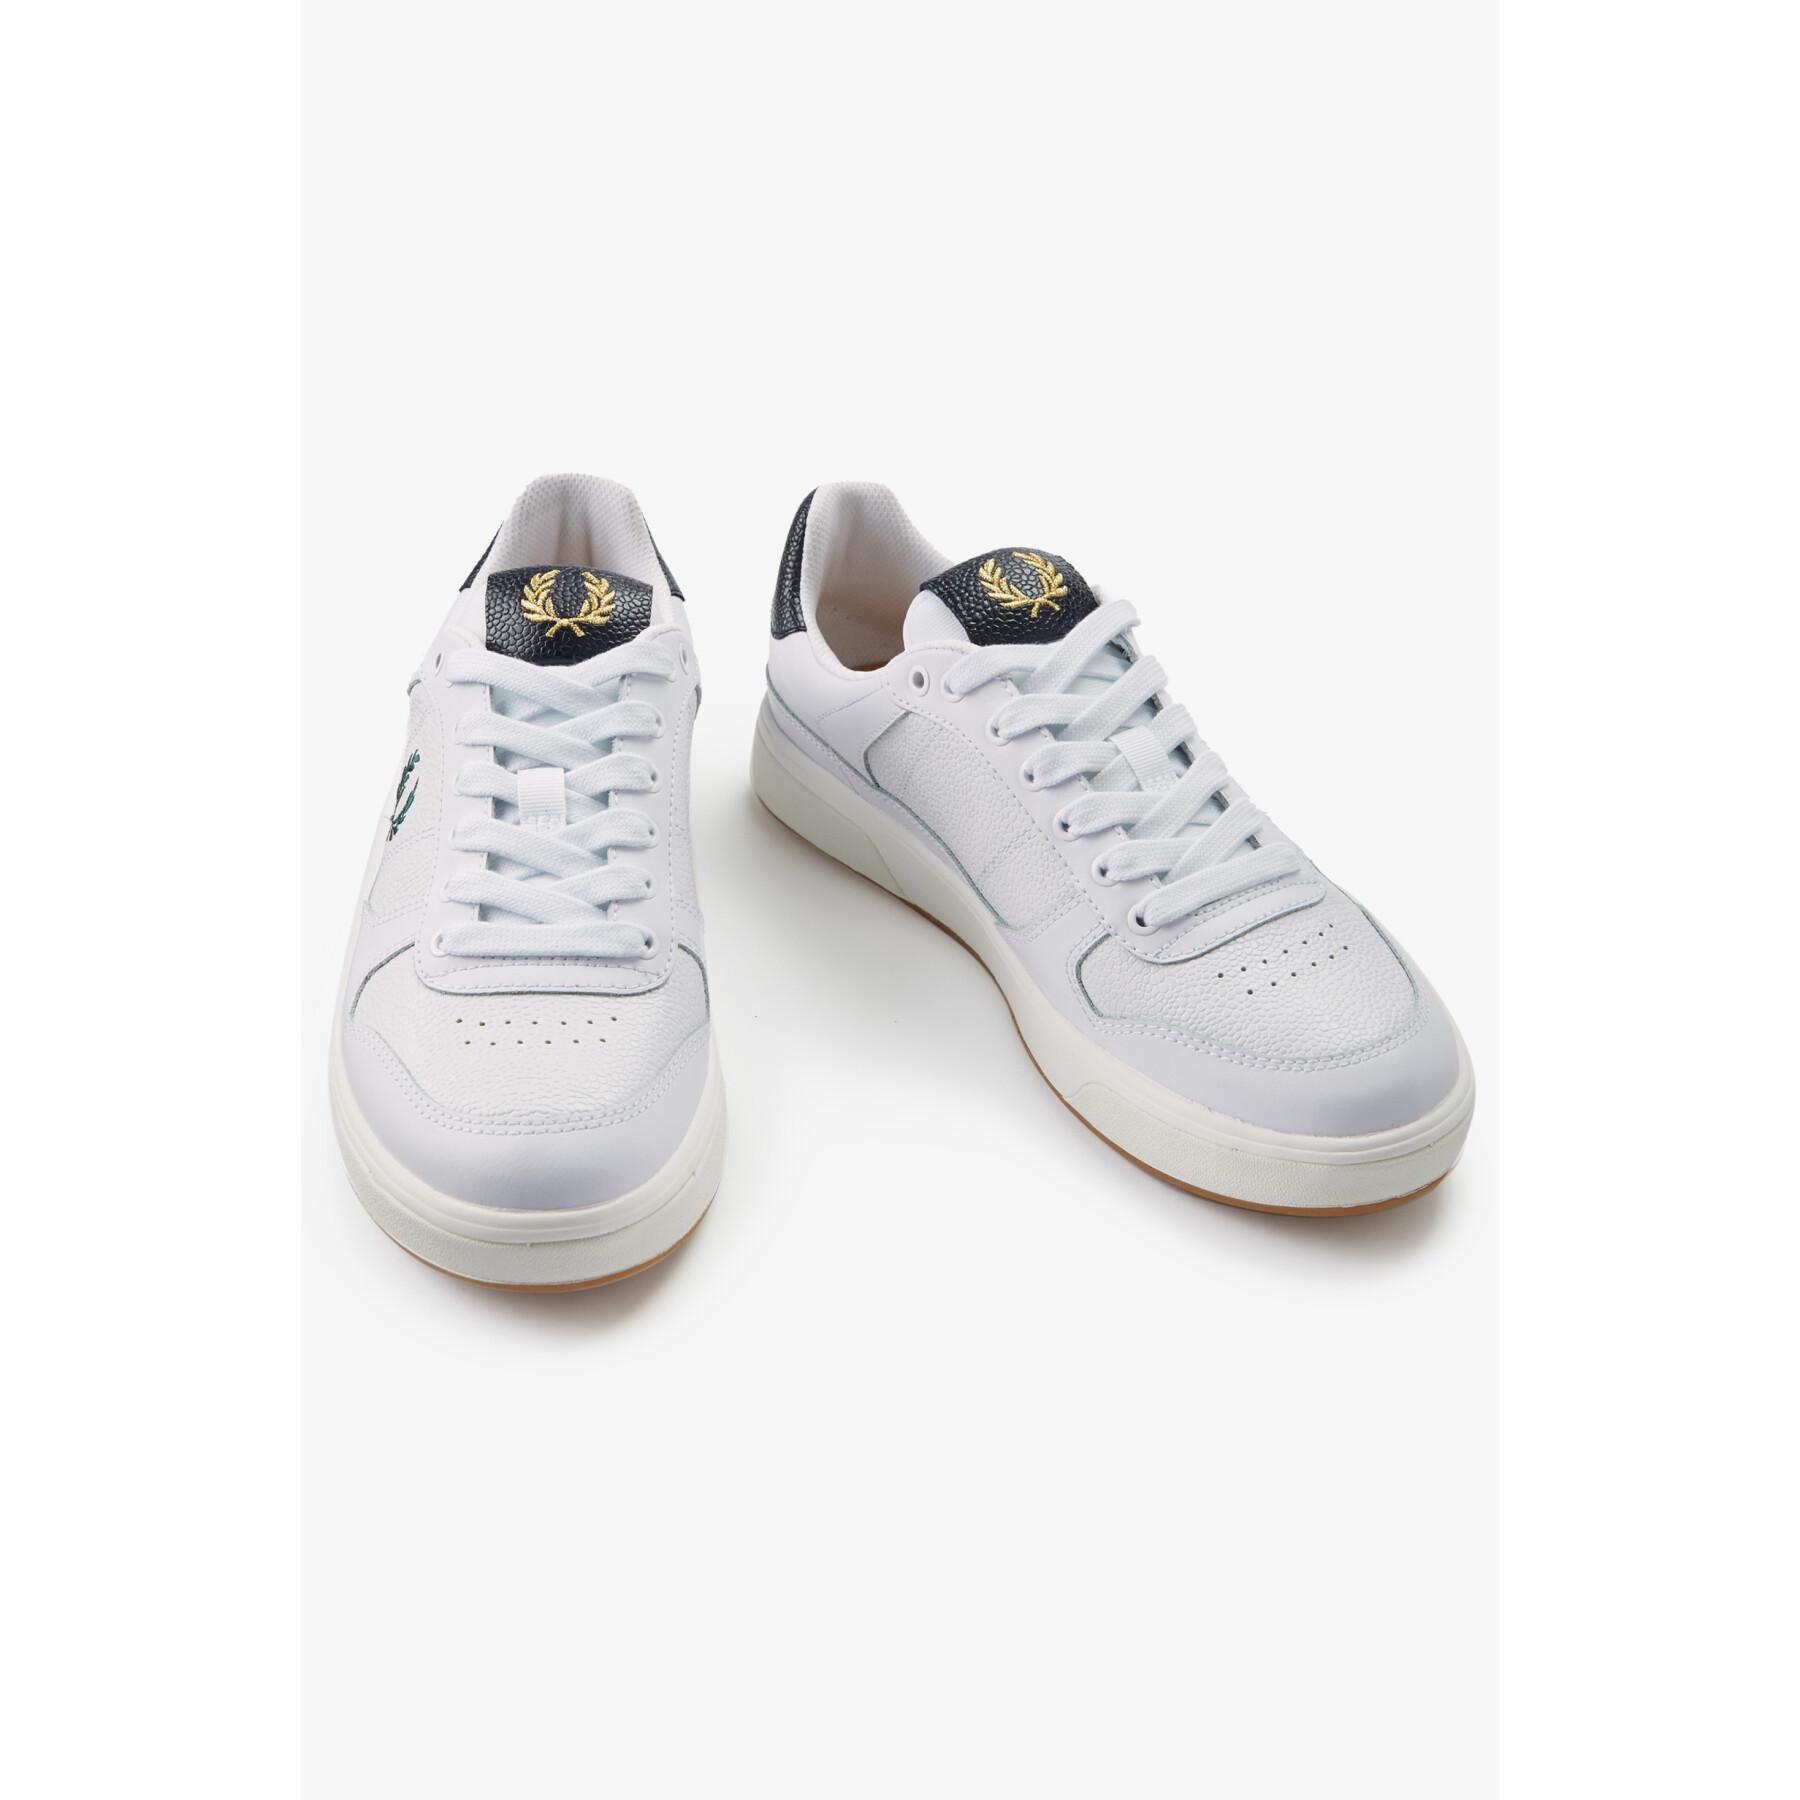 Baskets Fred Perry B300 Scotchgrain Leather